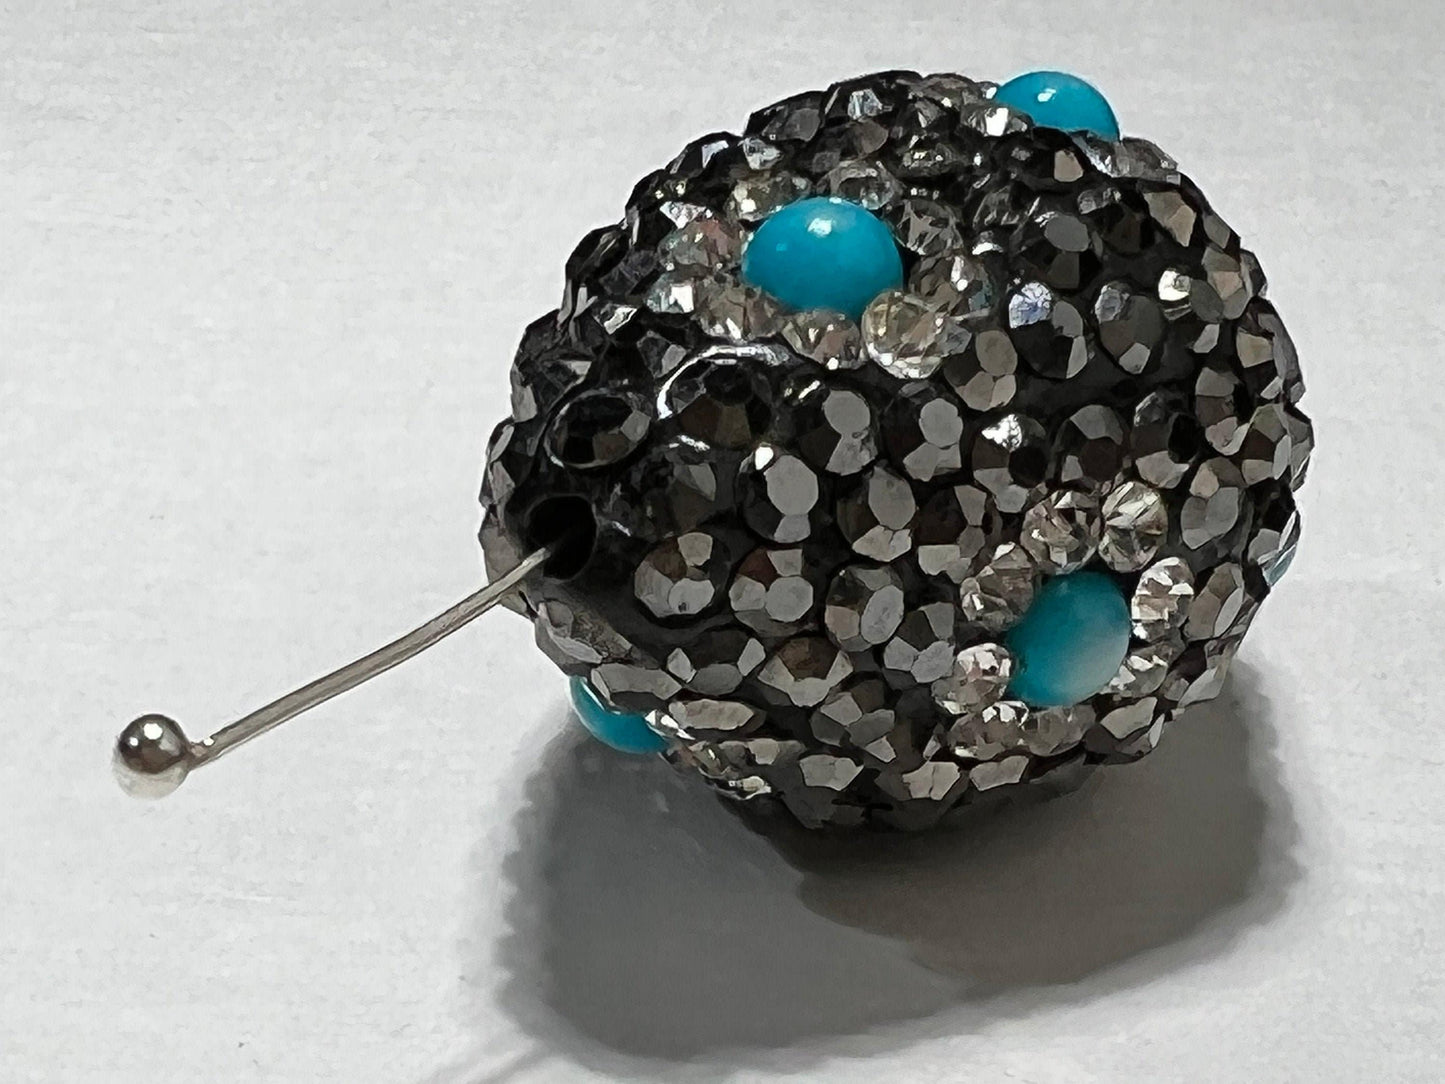 Pearl and Turquoise with Gold & Black Crystal Pave Rhinestone Handmade Fancy Focal Bead, 30-35mm Long, 1 pc, Jewelry Making Bling Bead